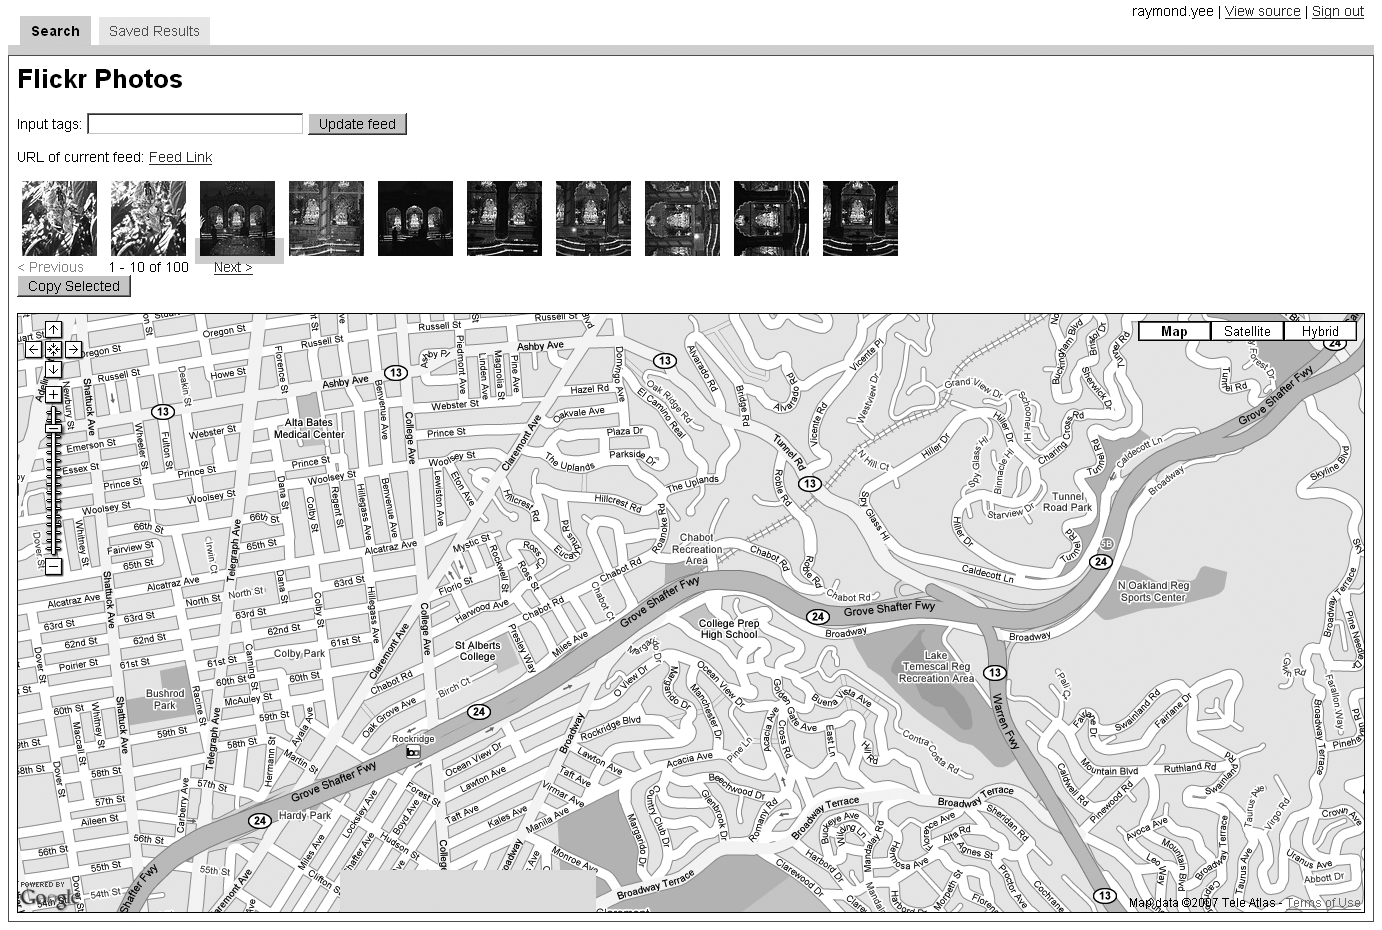 Figure 11-1. The Search tab of the Flickr/Google Maps mashup